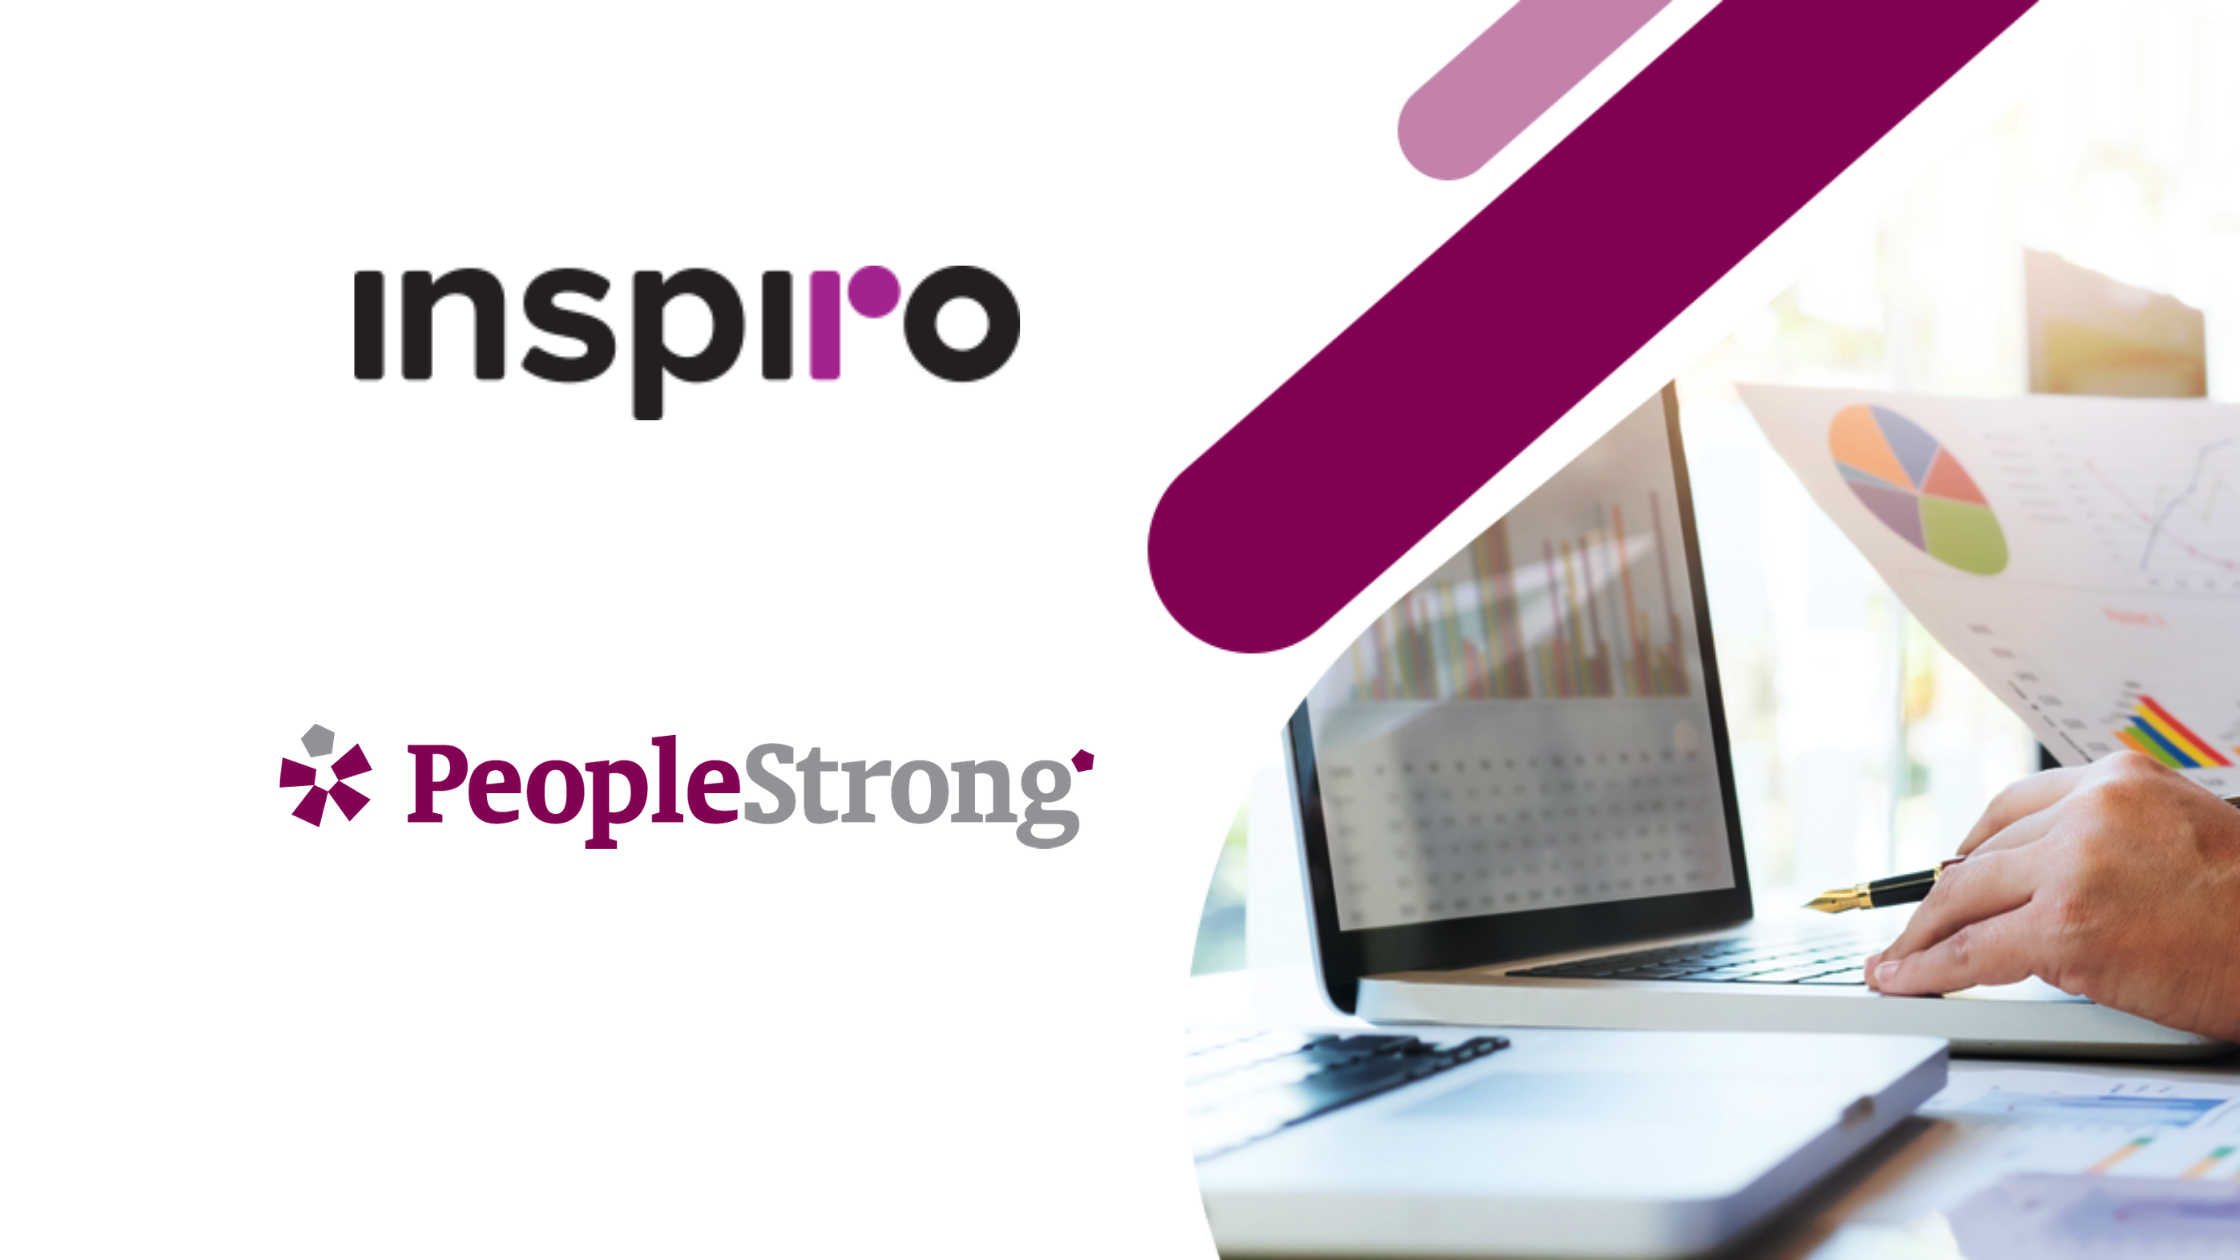 Inspiro partners with PeopleStrong in creating positive employee experiences for its global workforce